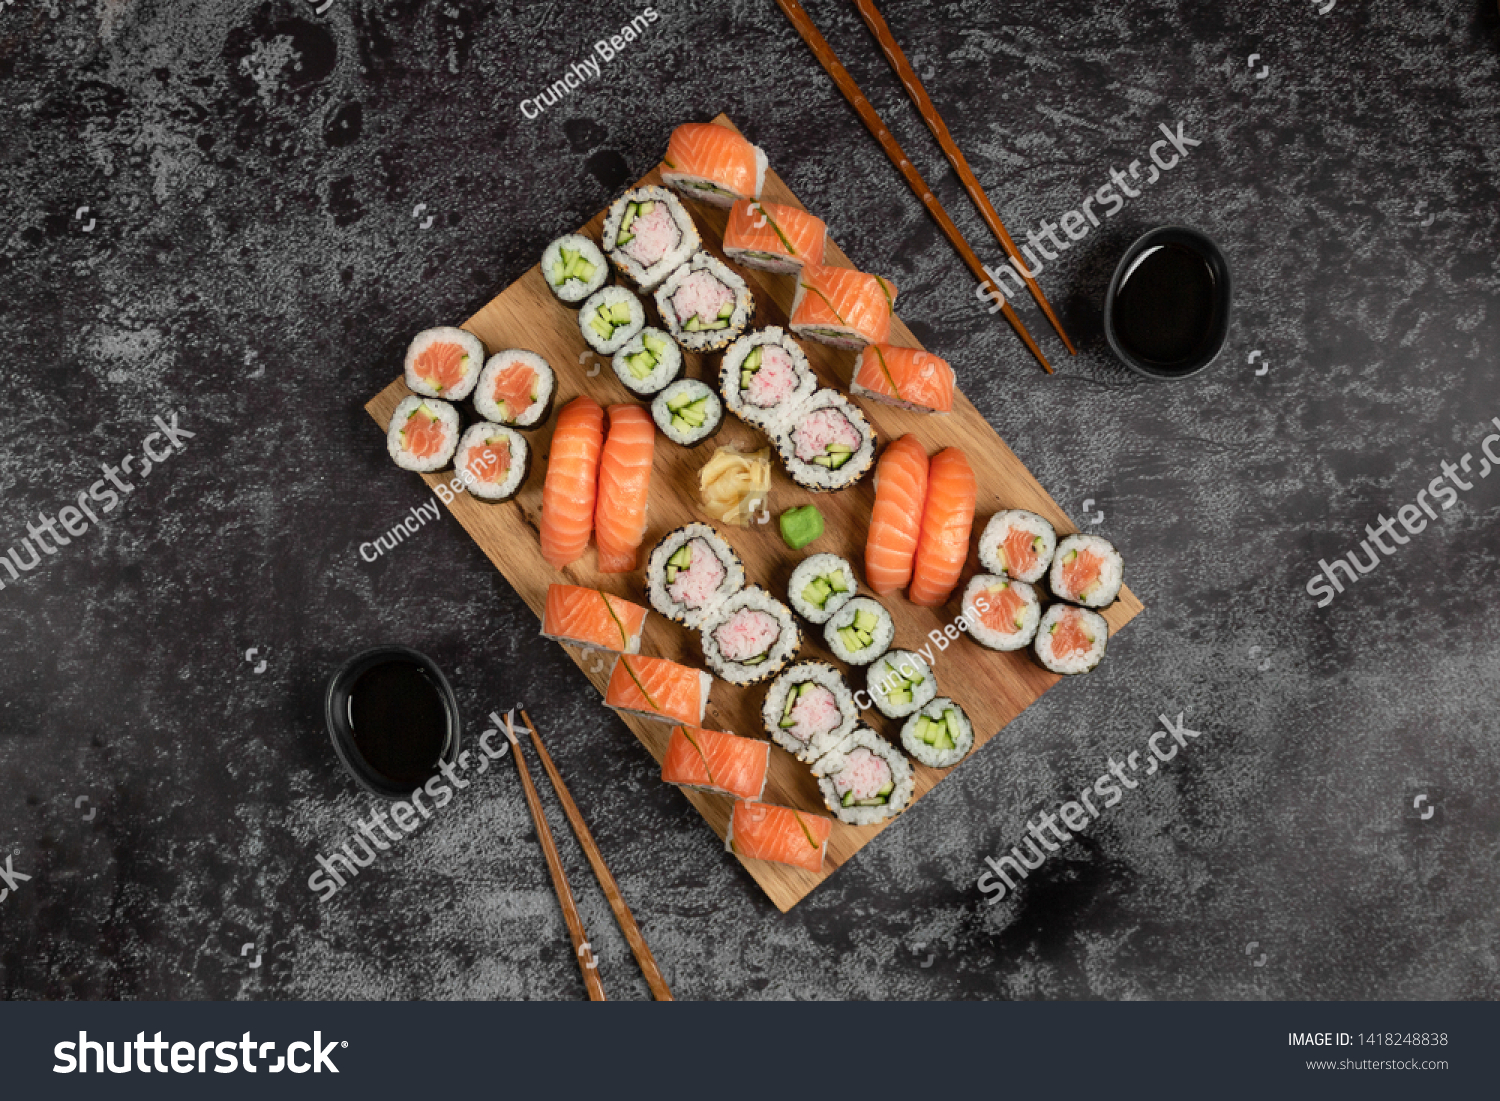 Sushi set of nigiri and maki rolls served on wooden board. Japanese food. Top view  #1418248838